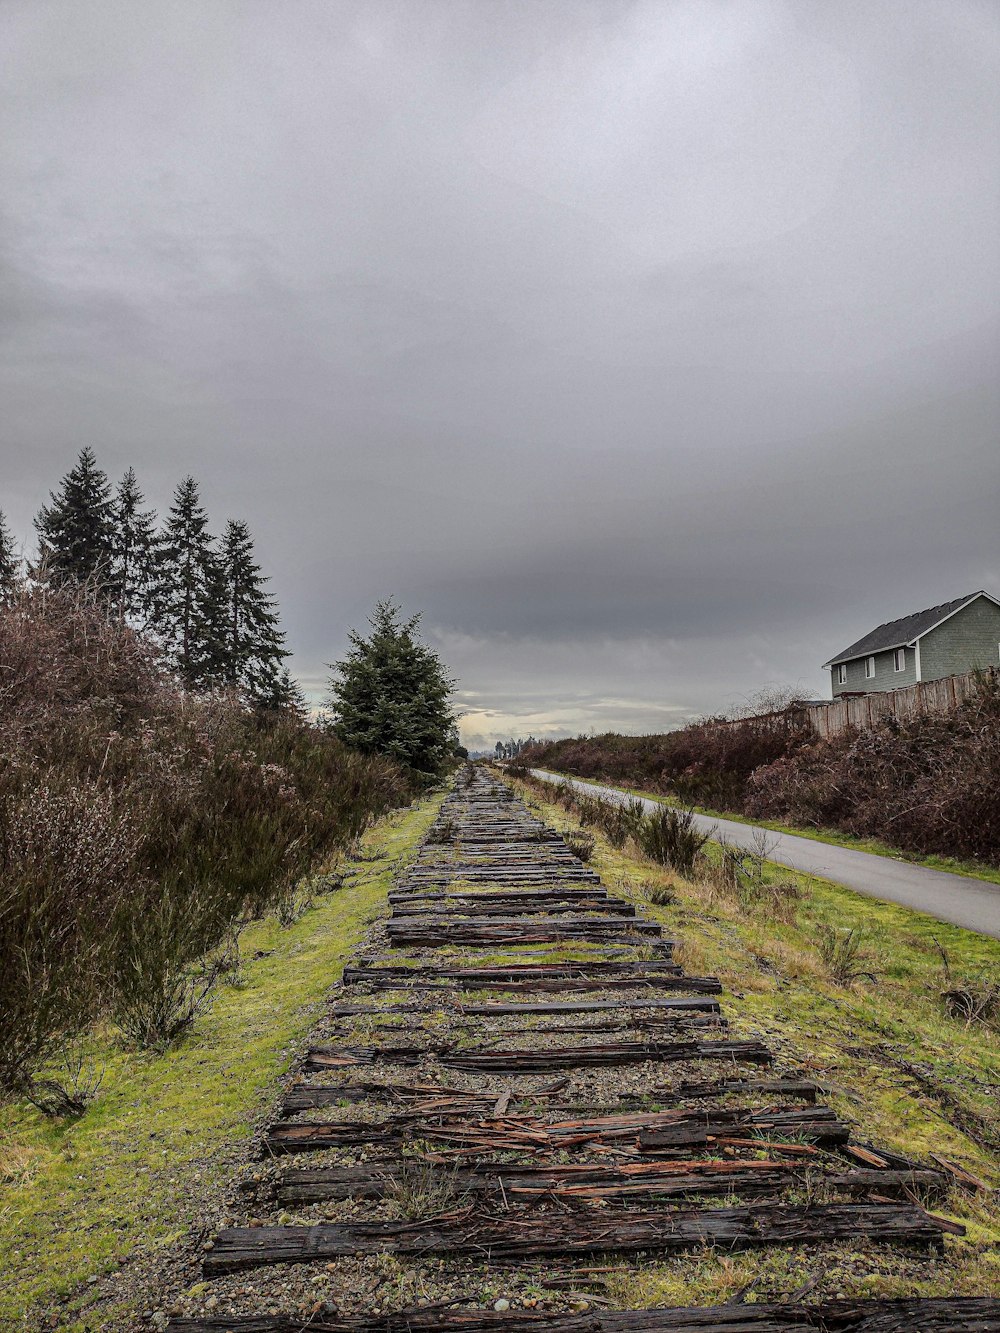 an old railroad track in the middle of nowhere